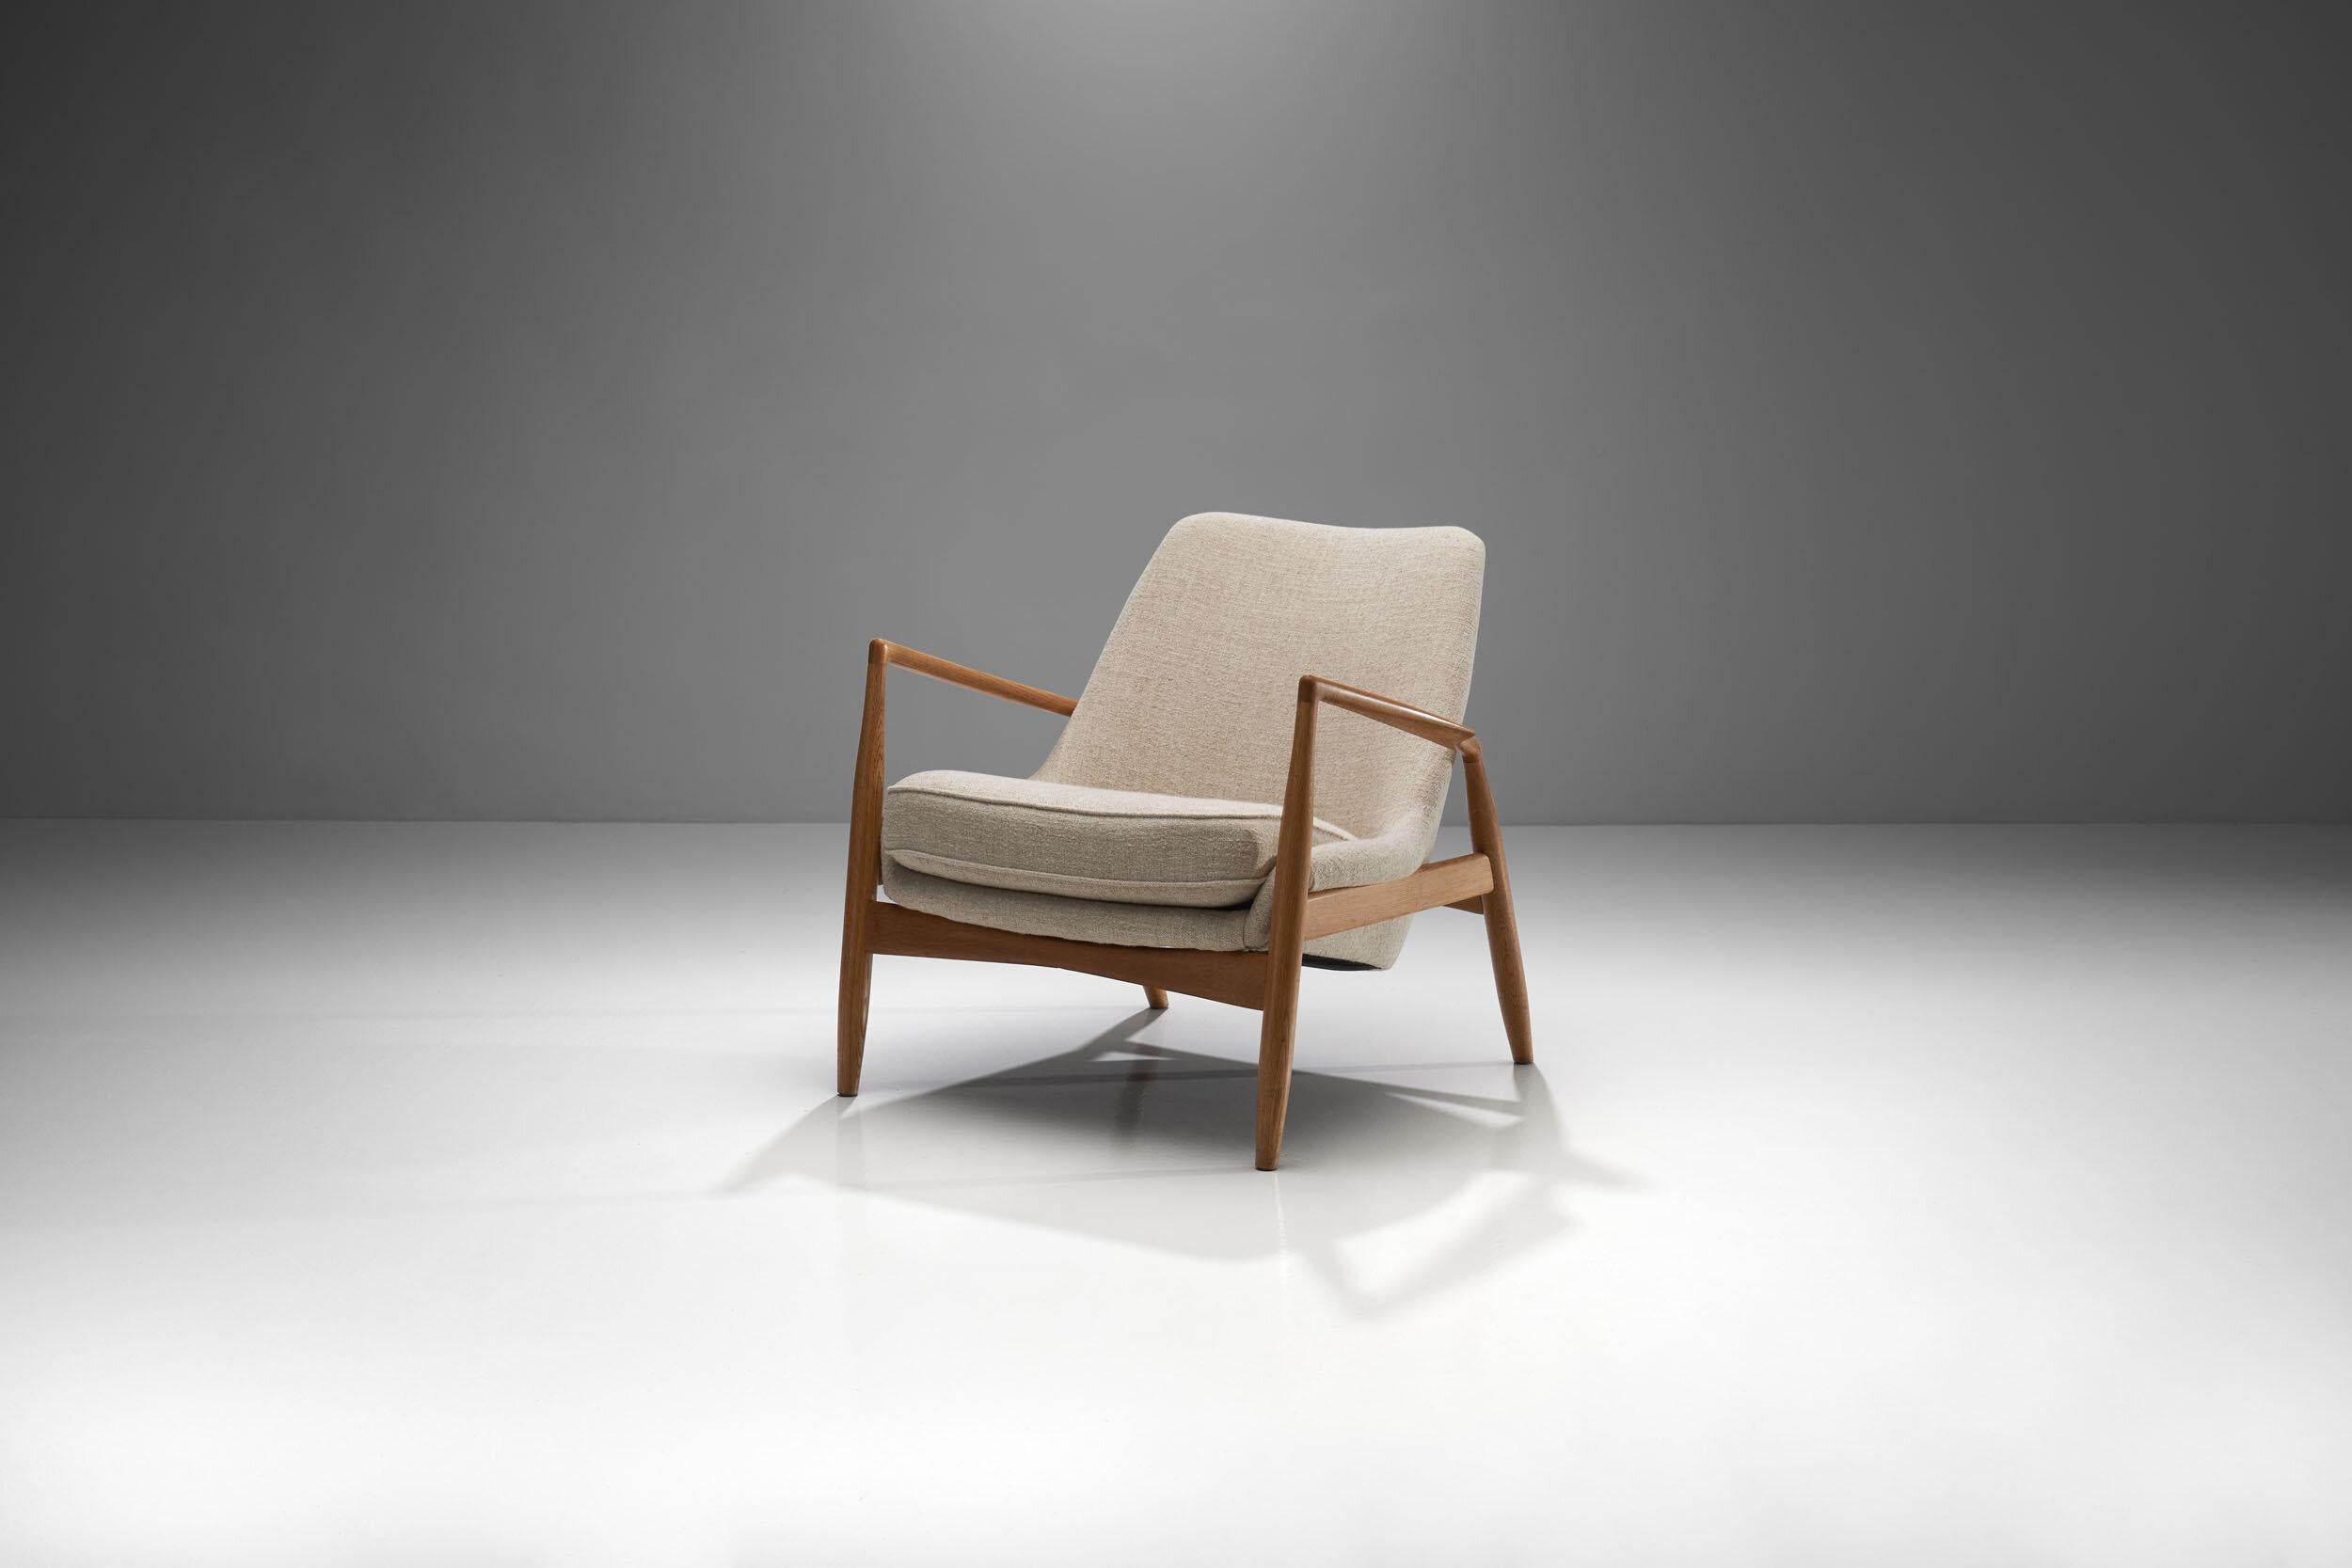 Early version of the 'Seal' lounge chair by Ib Kofod-Larsen in birch, produced by OPE, 1956. Re-upholstered in a light linen blend fabric by Pierre Frey.

The clear lined frame of this chair contrasts beautifully with the angled seating and gives